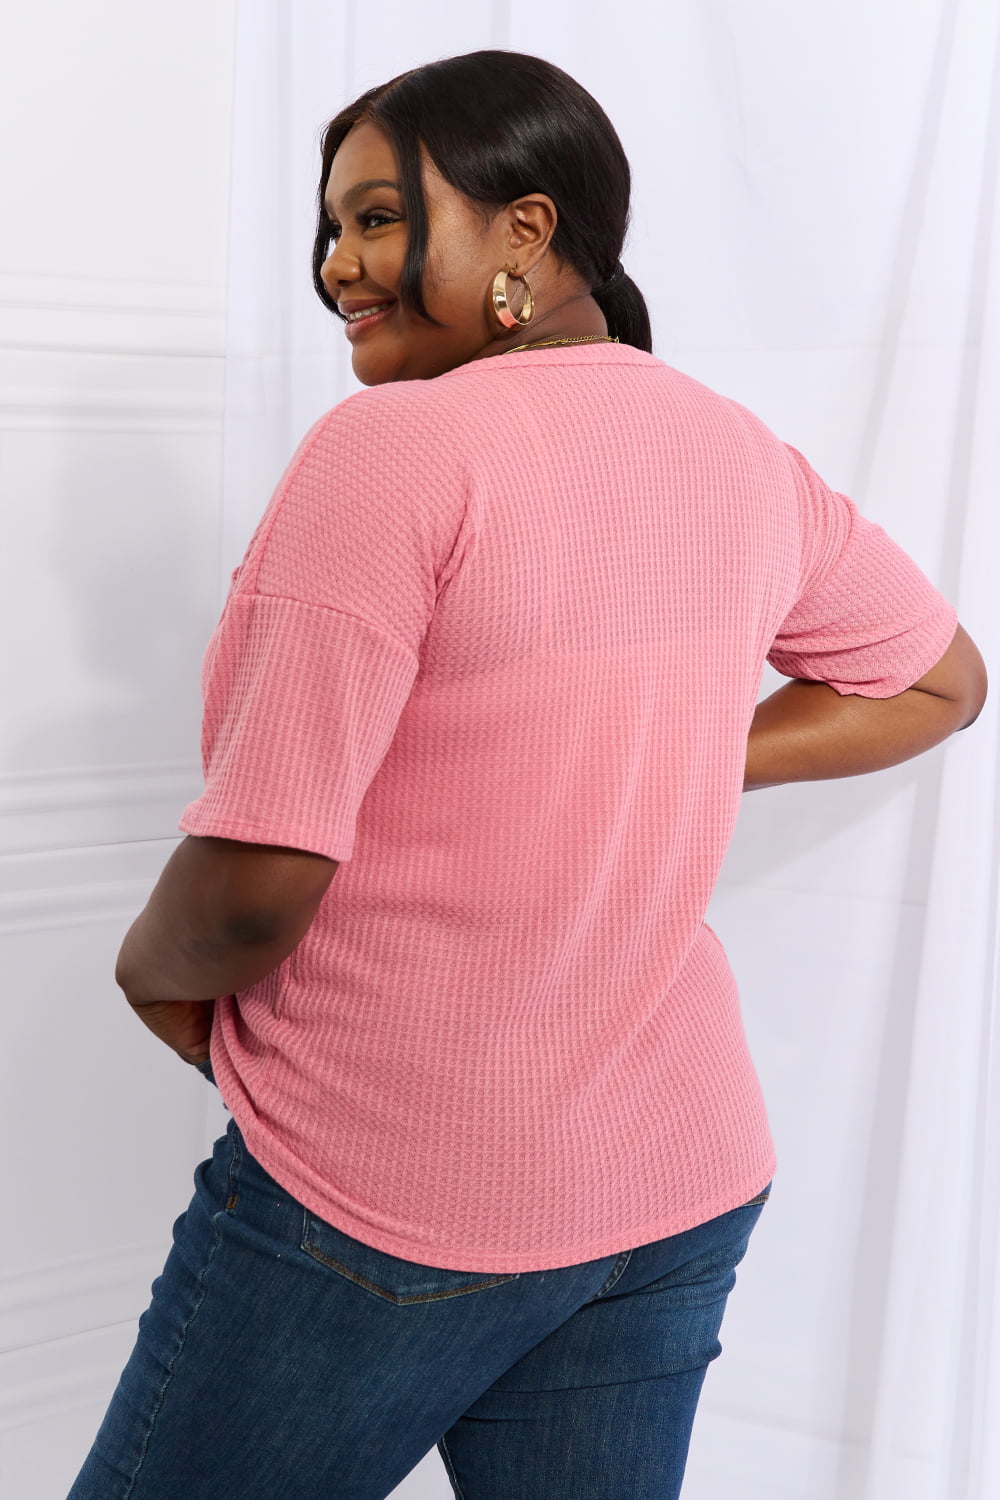 Heimish Made For You Full Size 1/4 Button Down Waffle Top in Coral - AnnRose Boutique